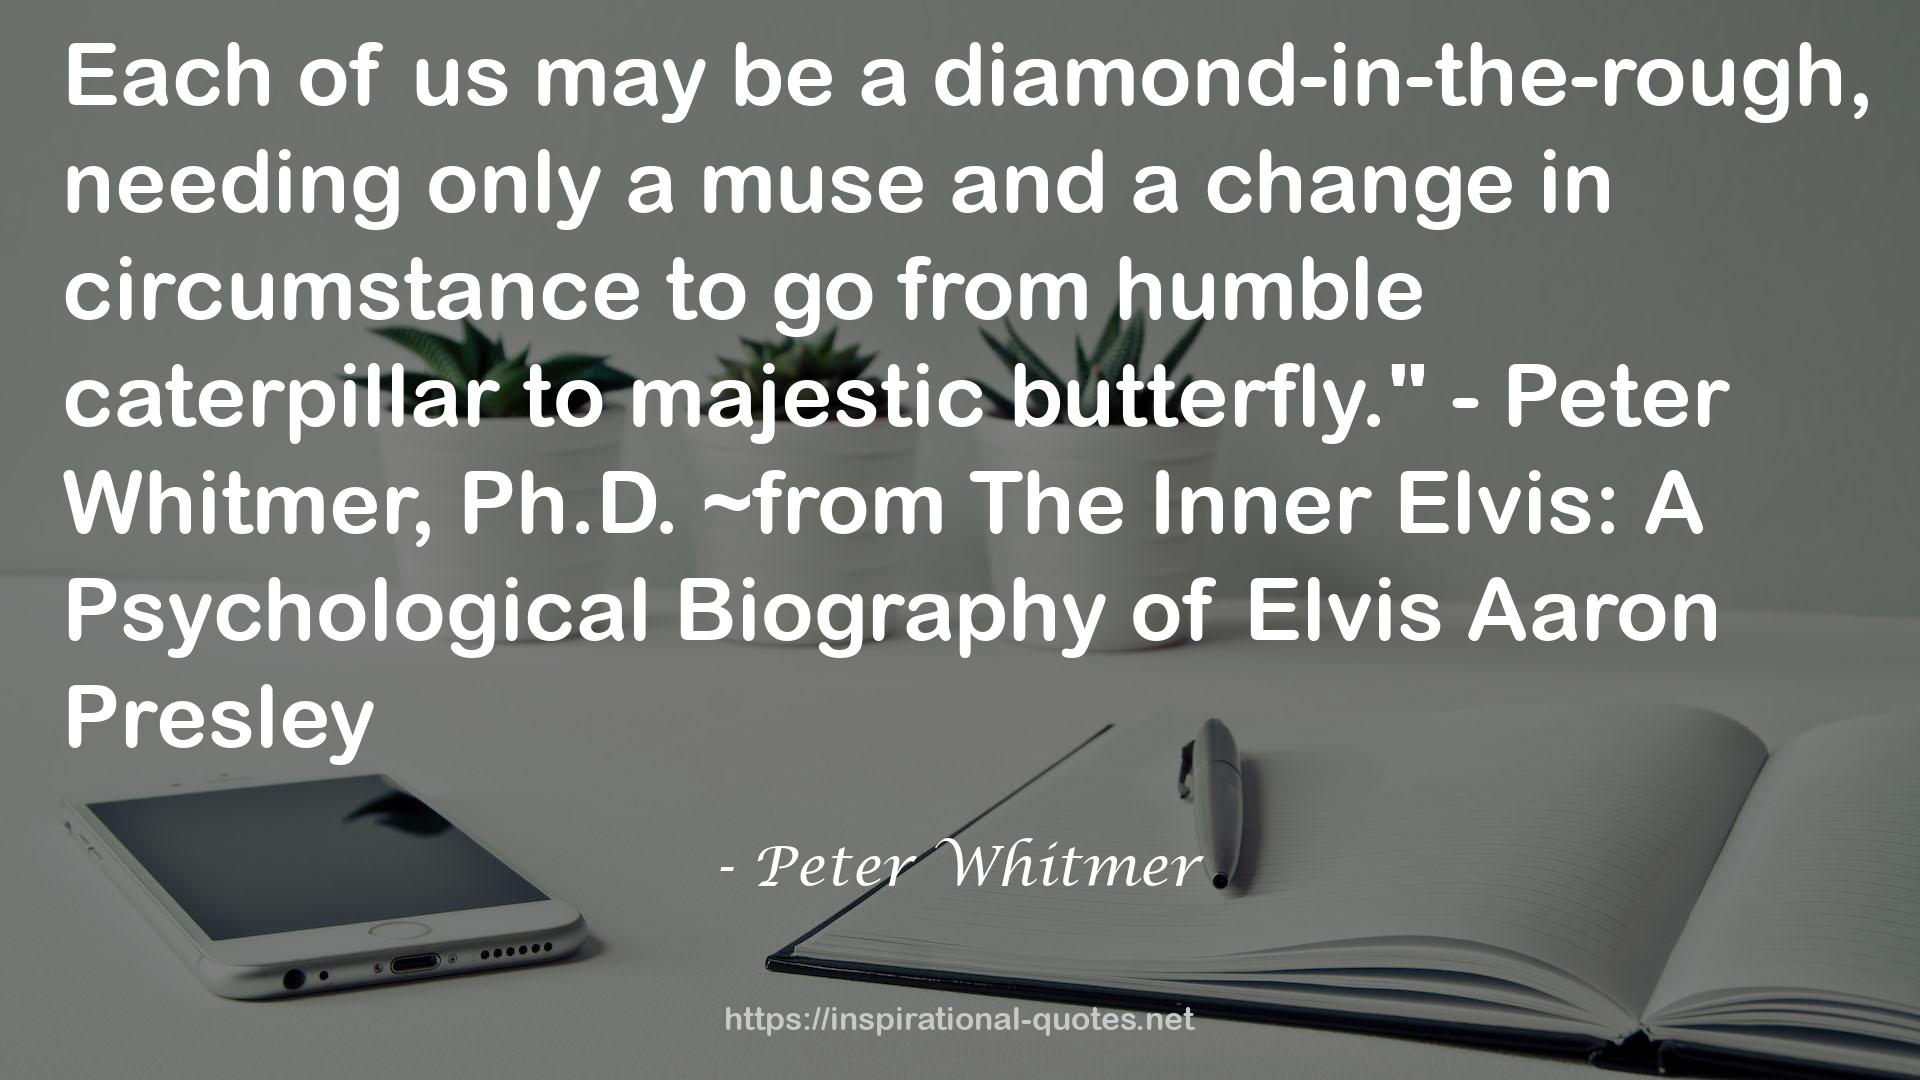 Peter Whitmer QUOTES